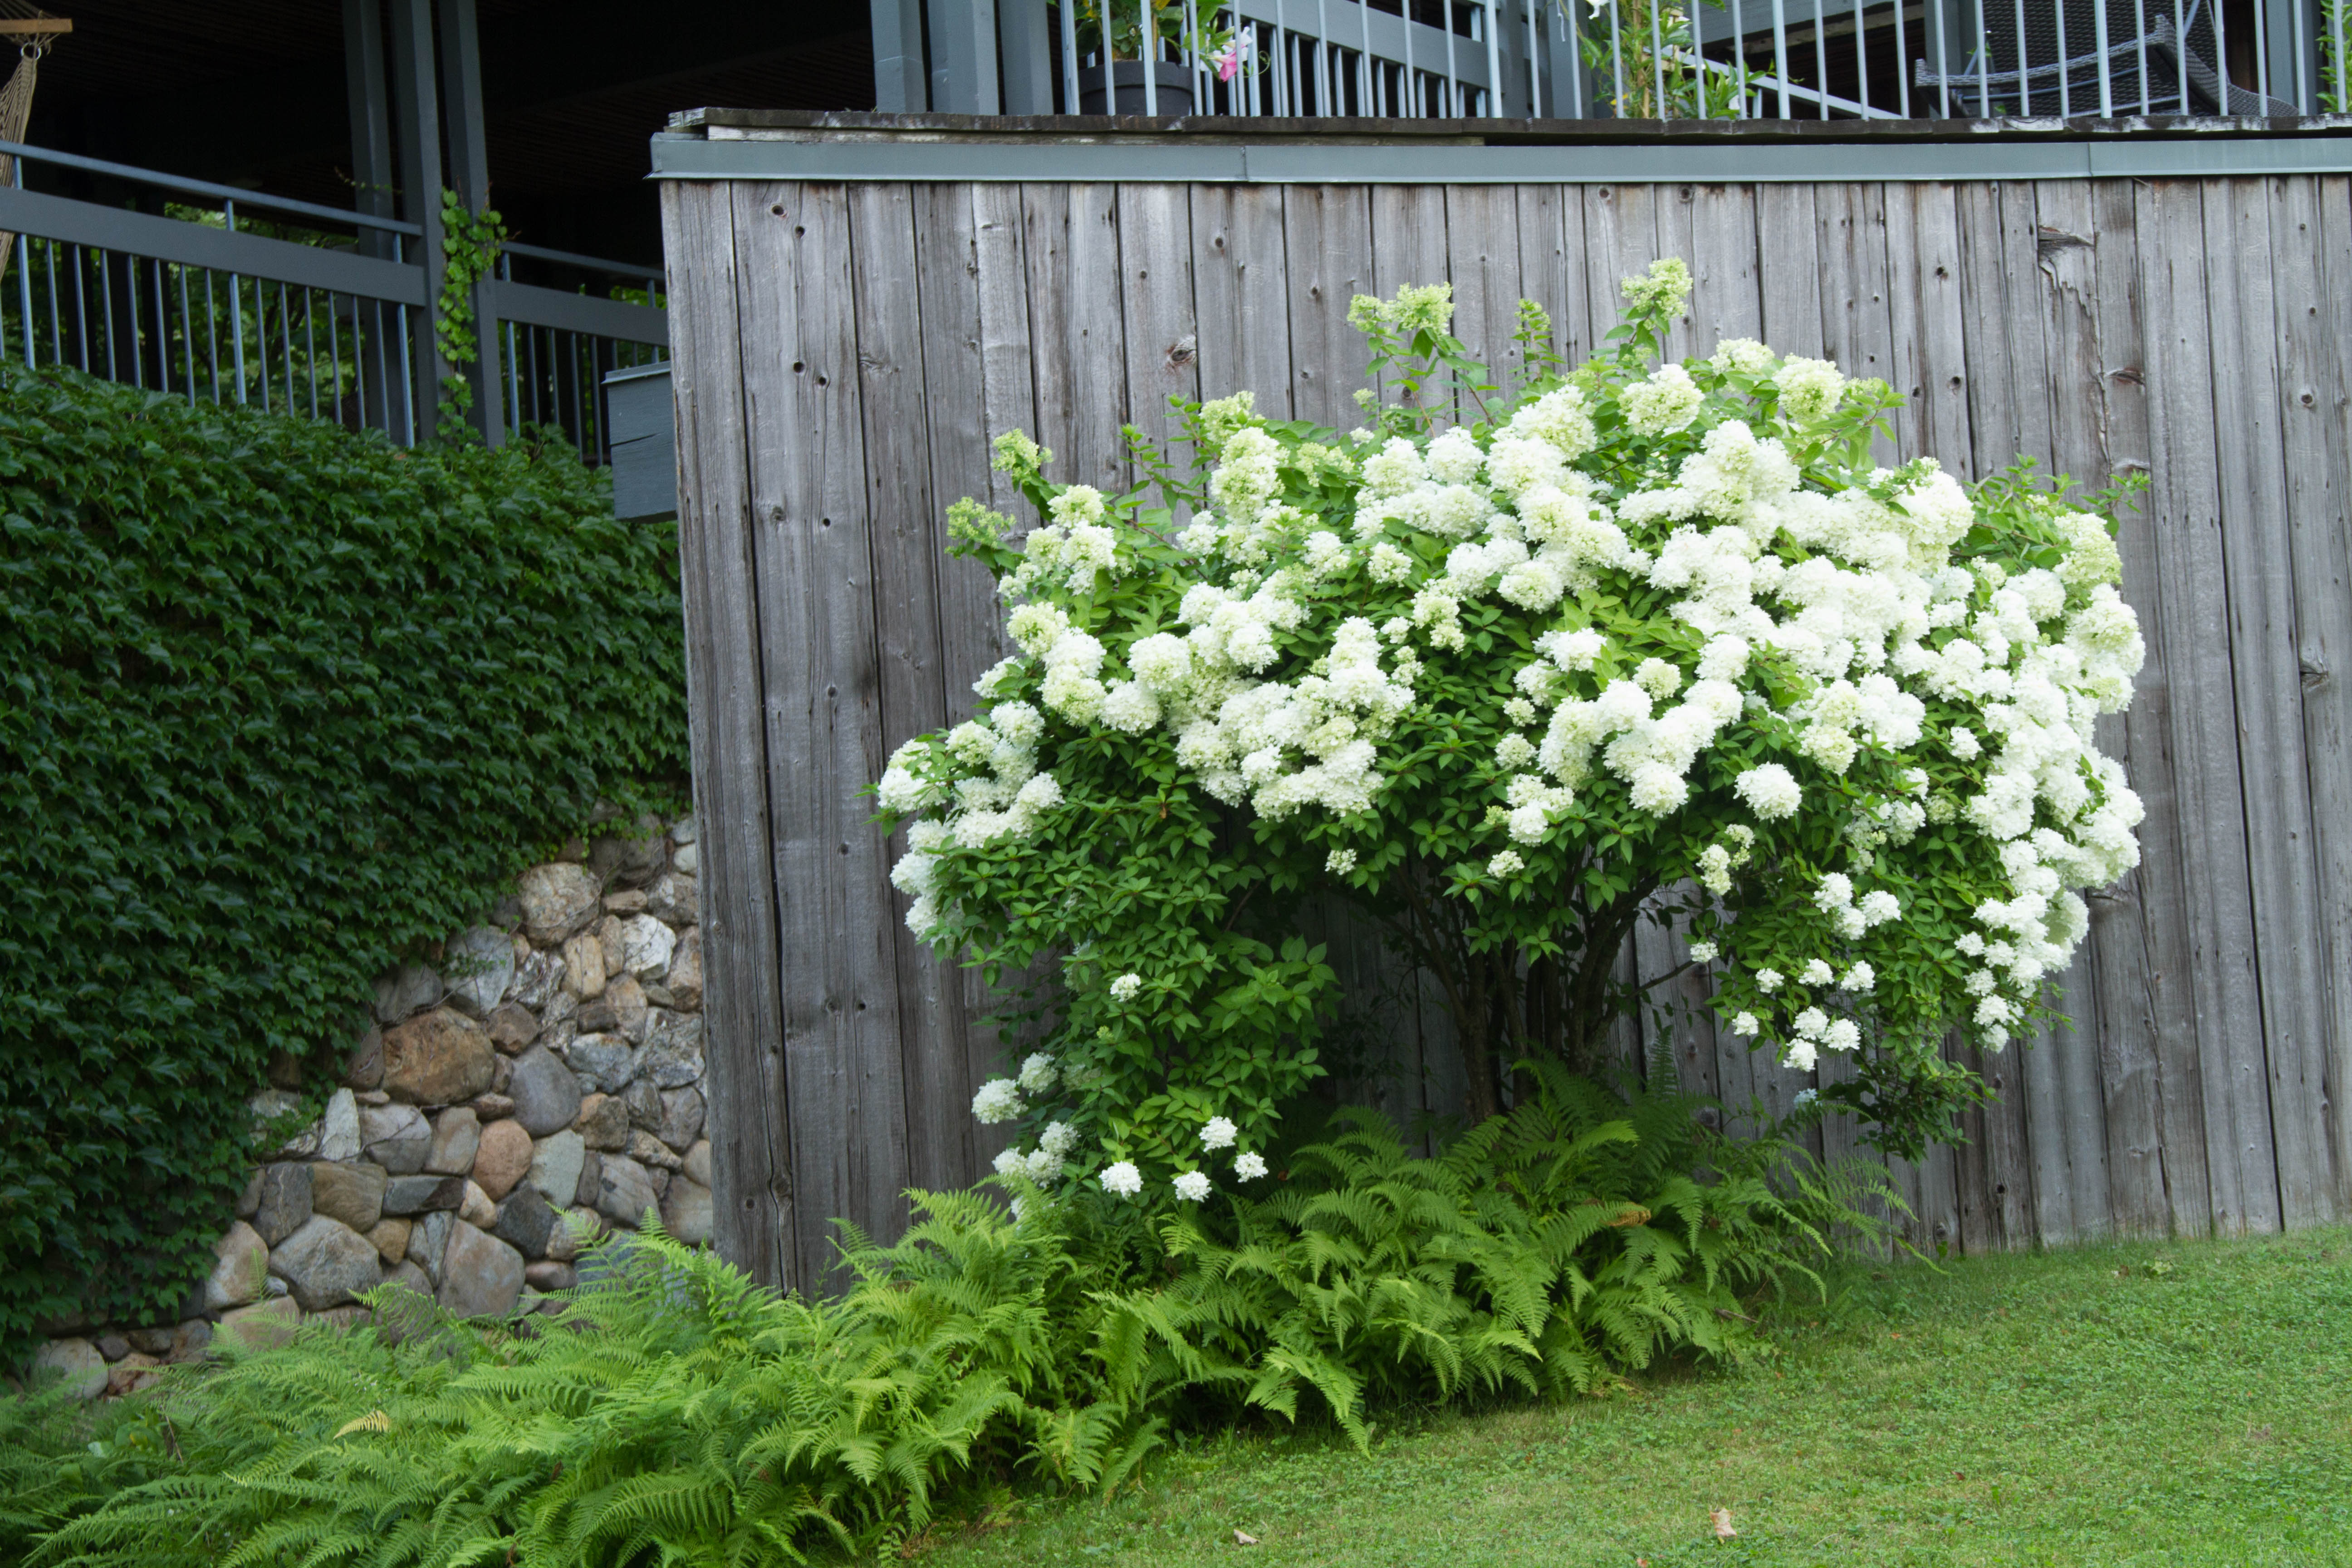 This peegee hydrangea (more properly called Hydrangea paniculata 'Grandiflora') is one of the most cold-hardy varieties. It was here when we moved into the house 22 years ago.